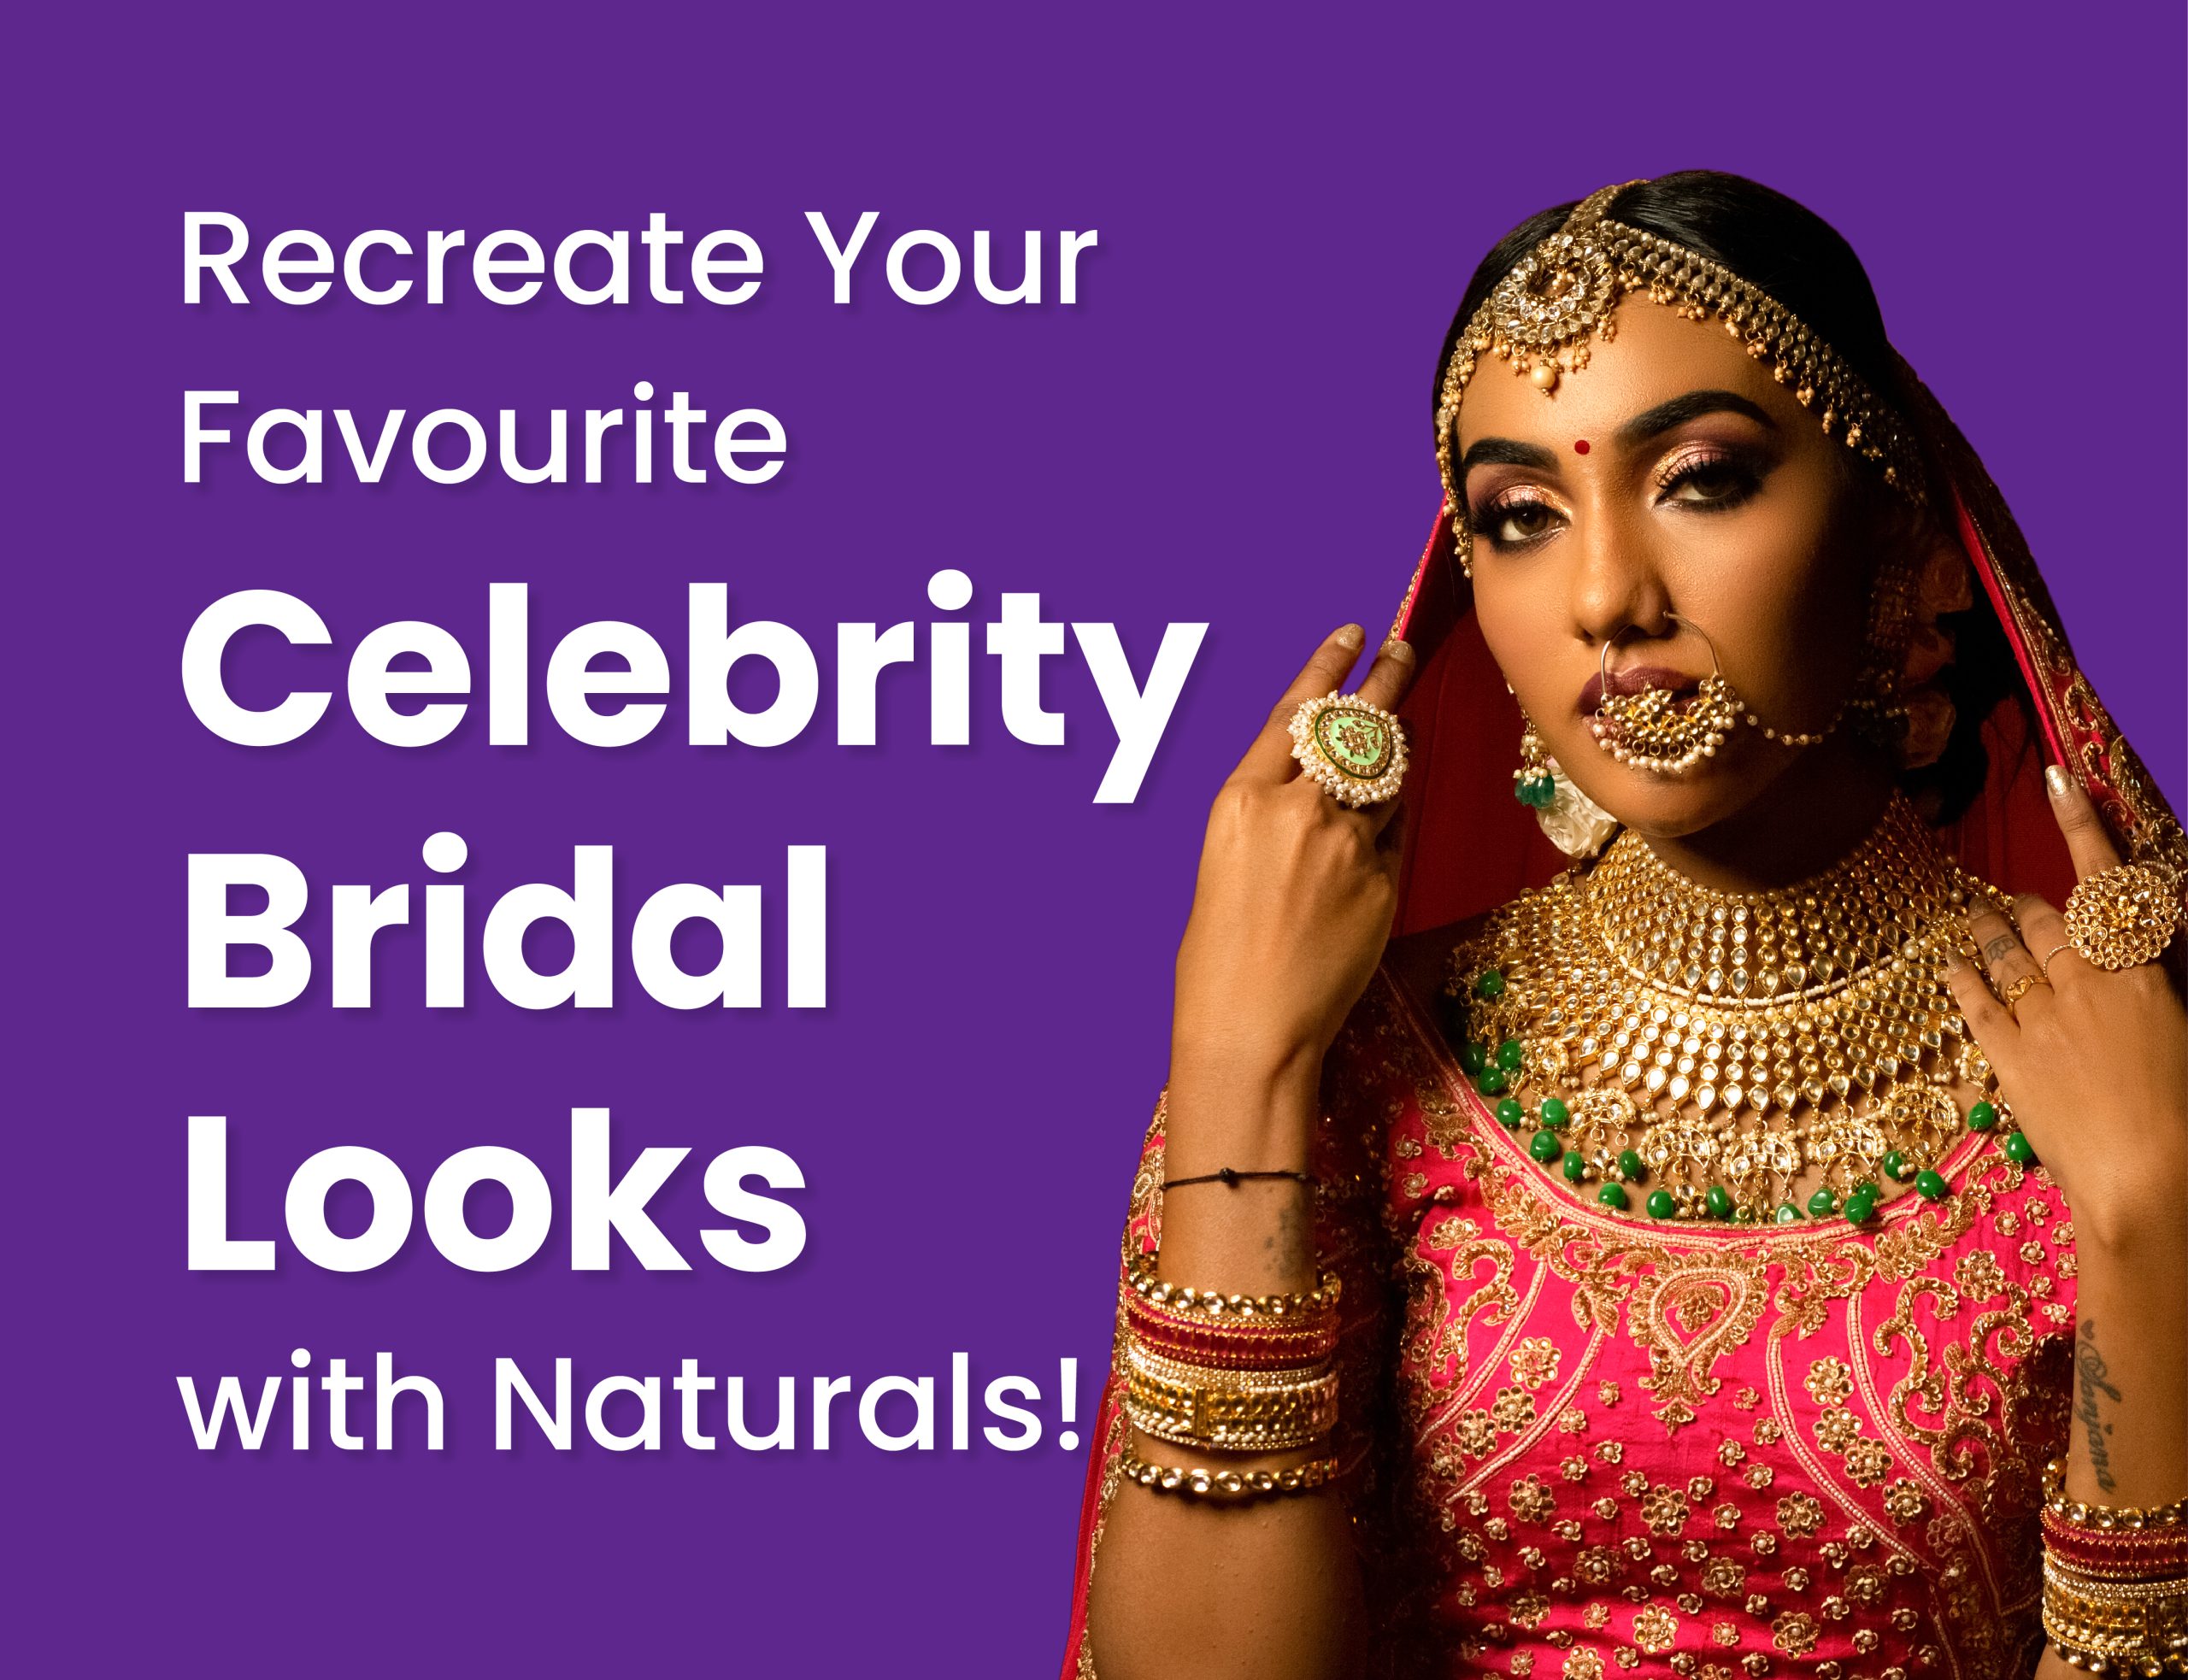 Recreate Your Favourite Celebrity Bridal Looks With Naturals